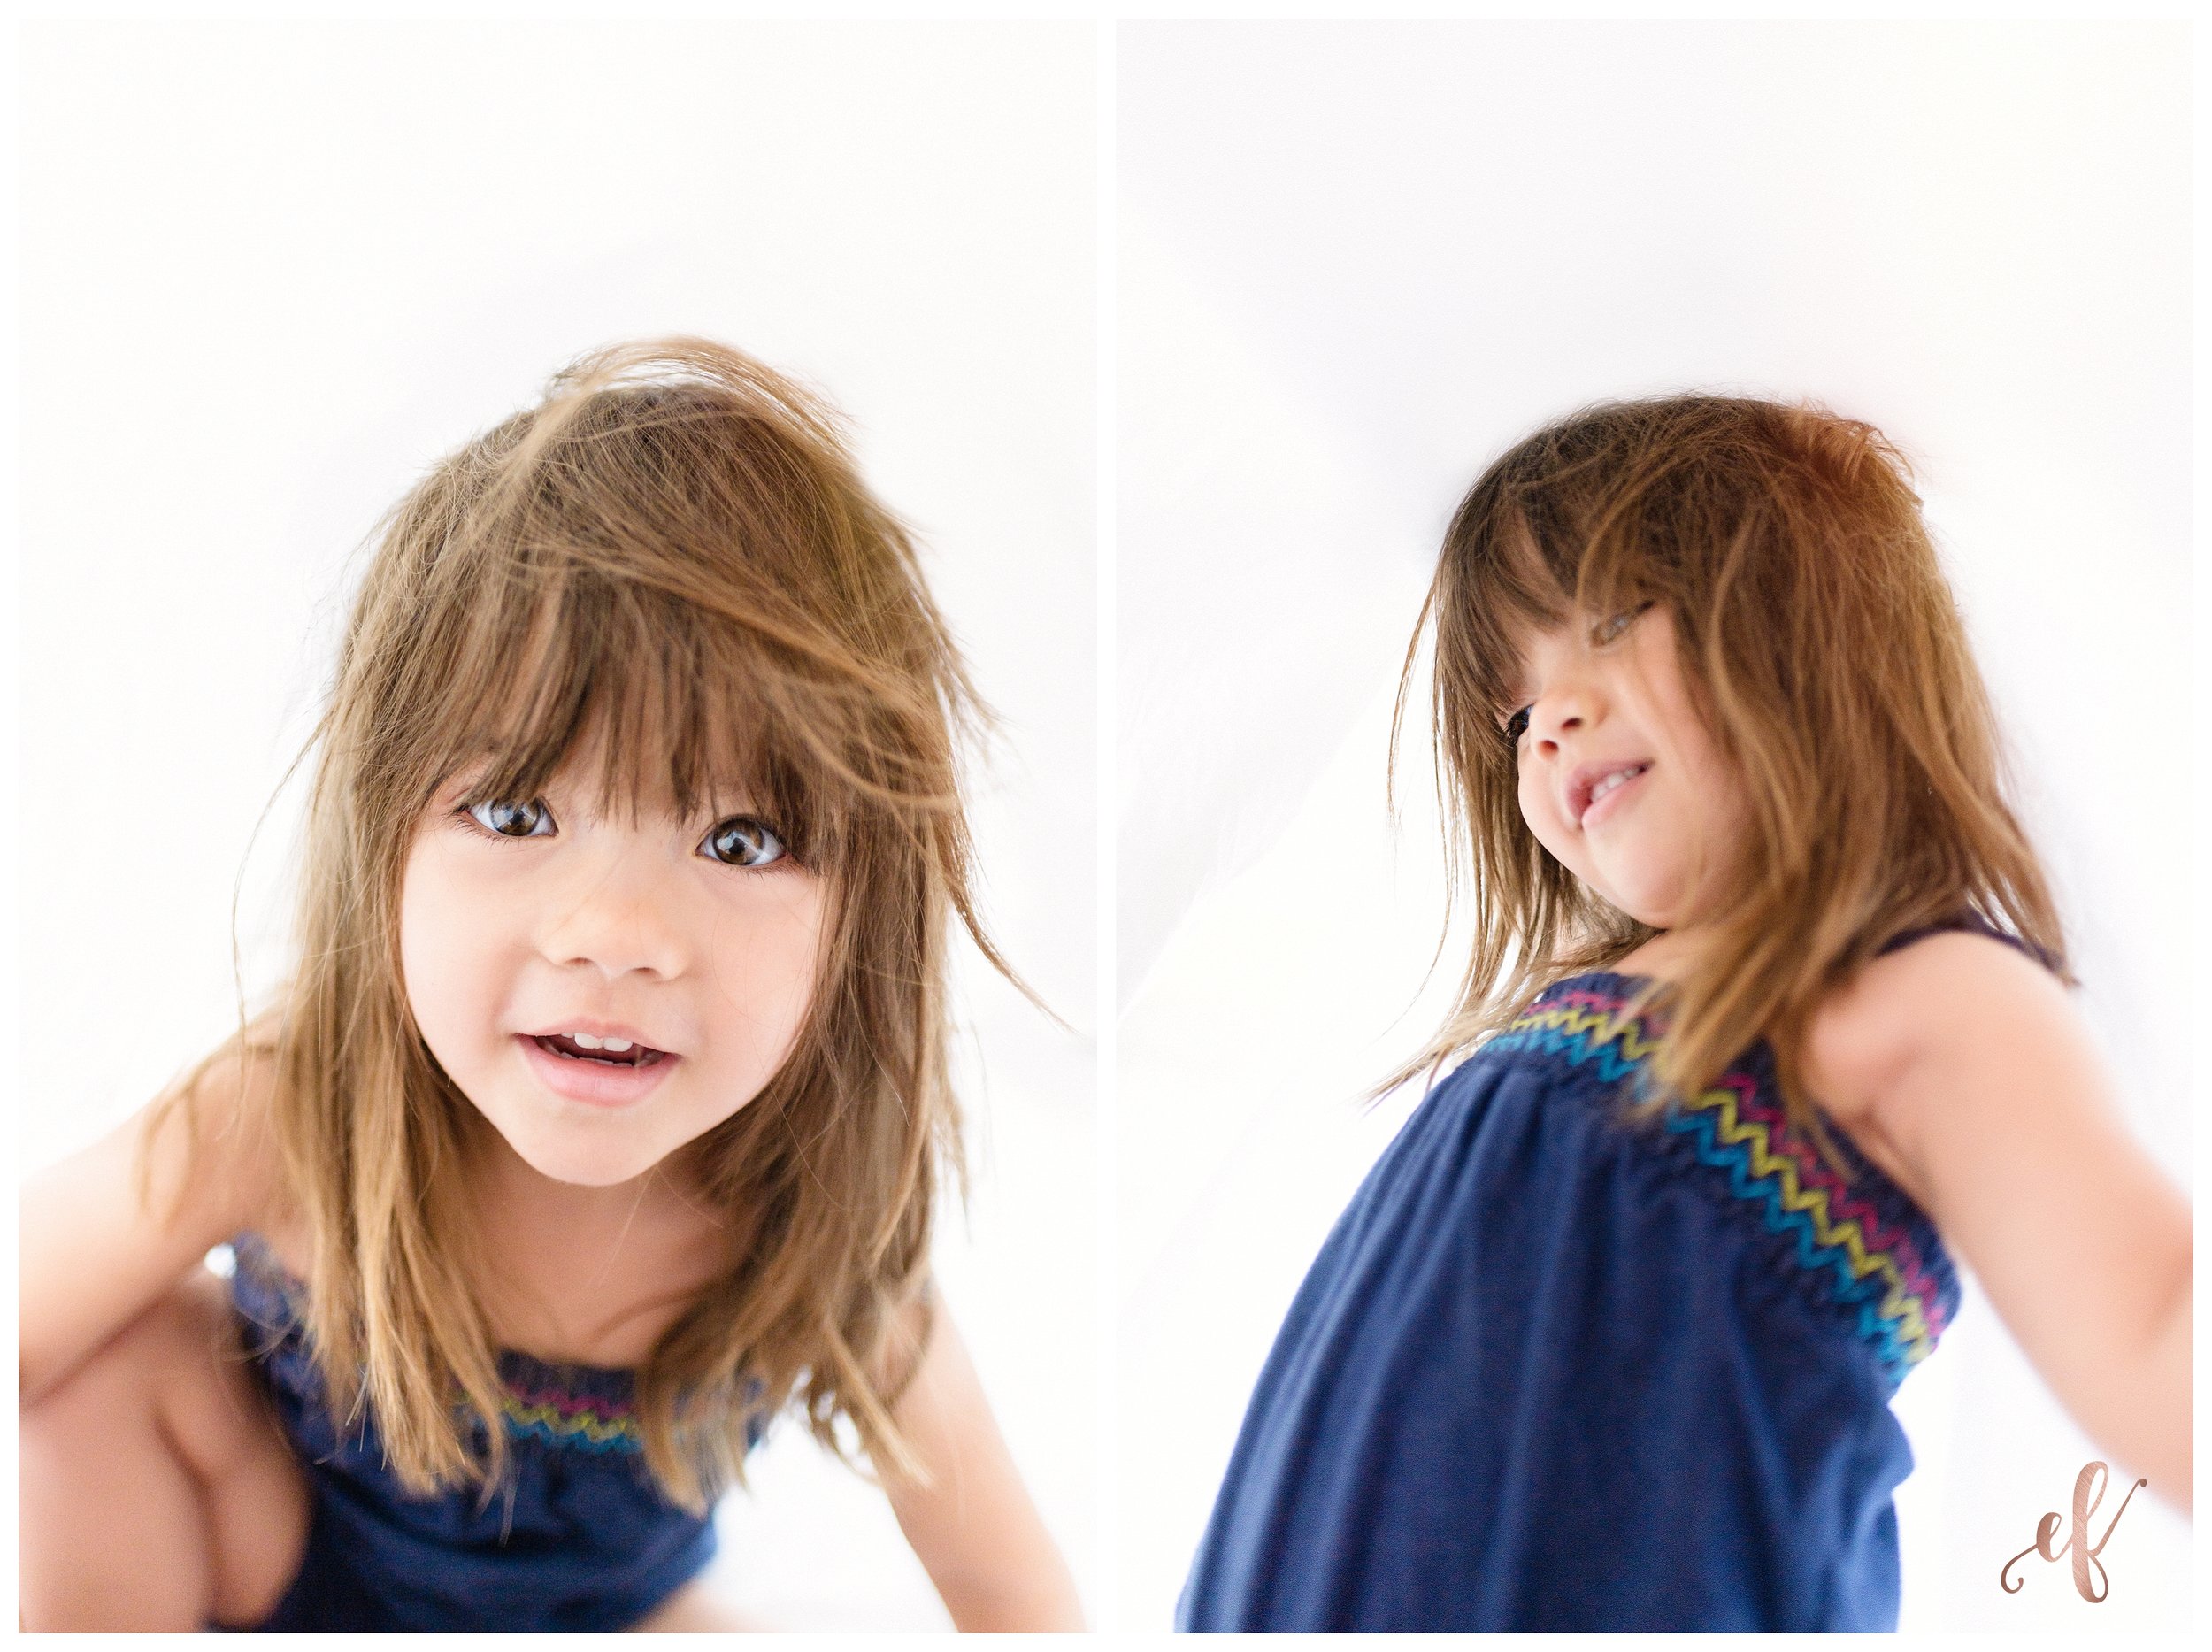 San Diego Portrait Photography | Family | Kids | White Bed Sheet